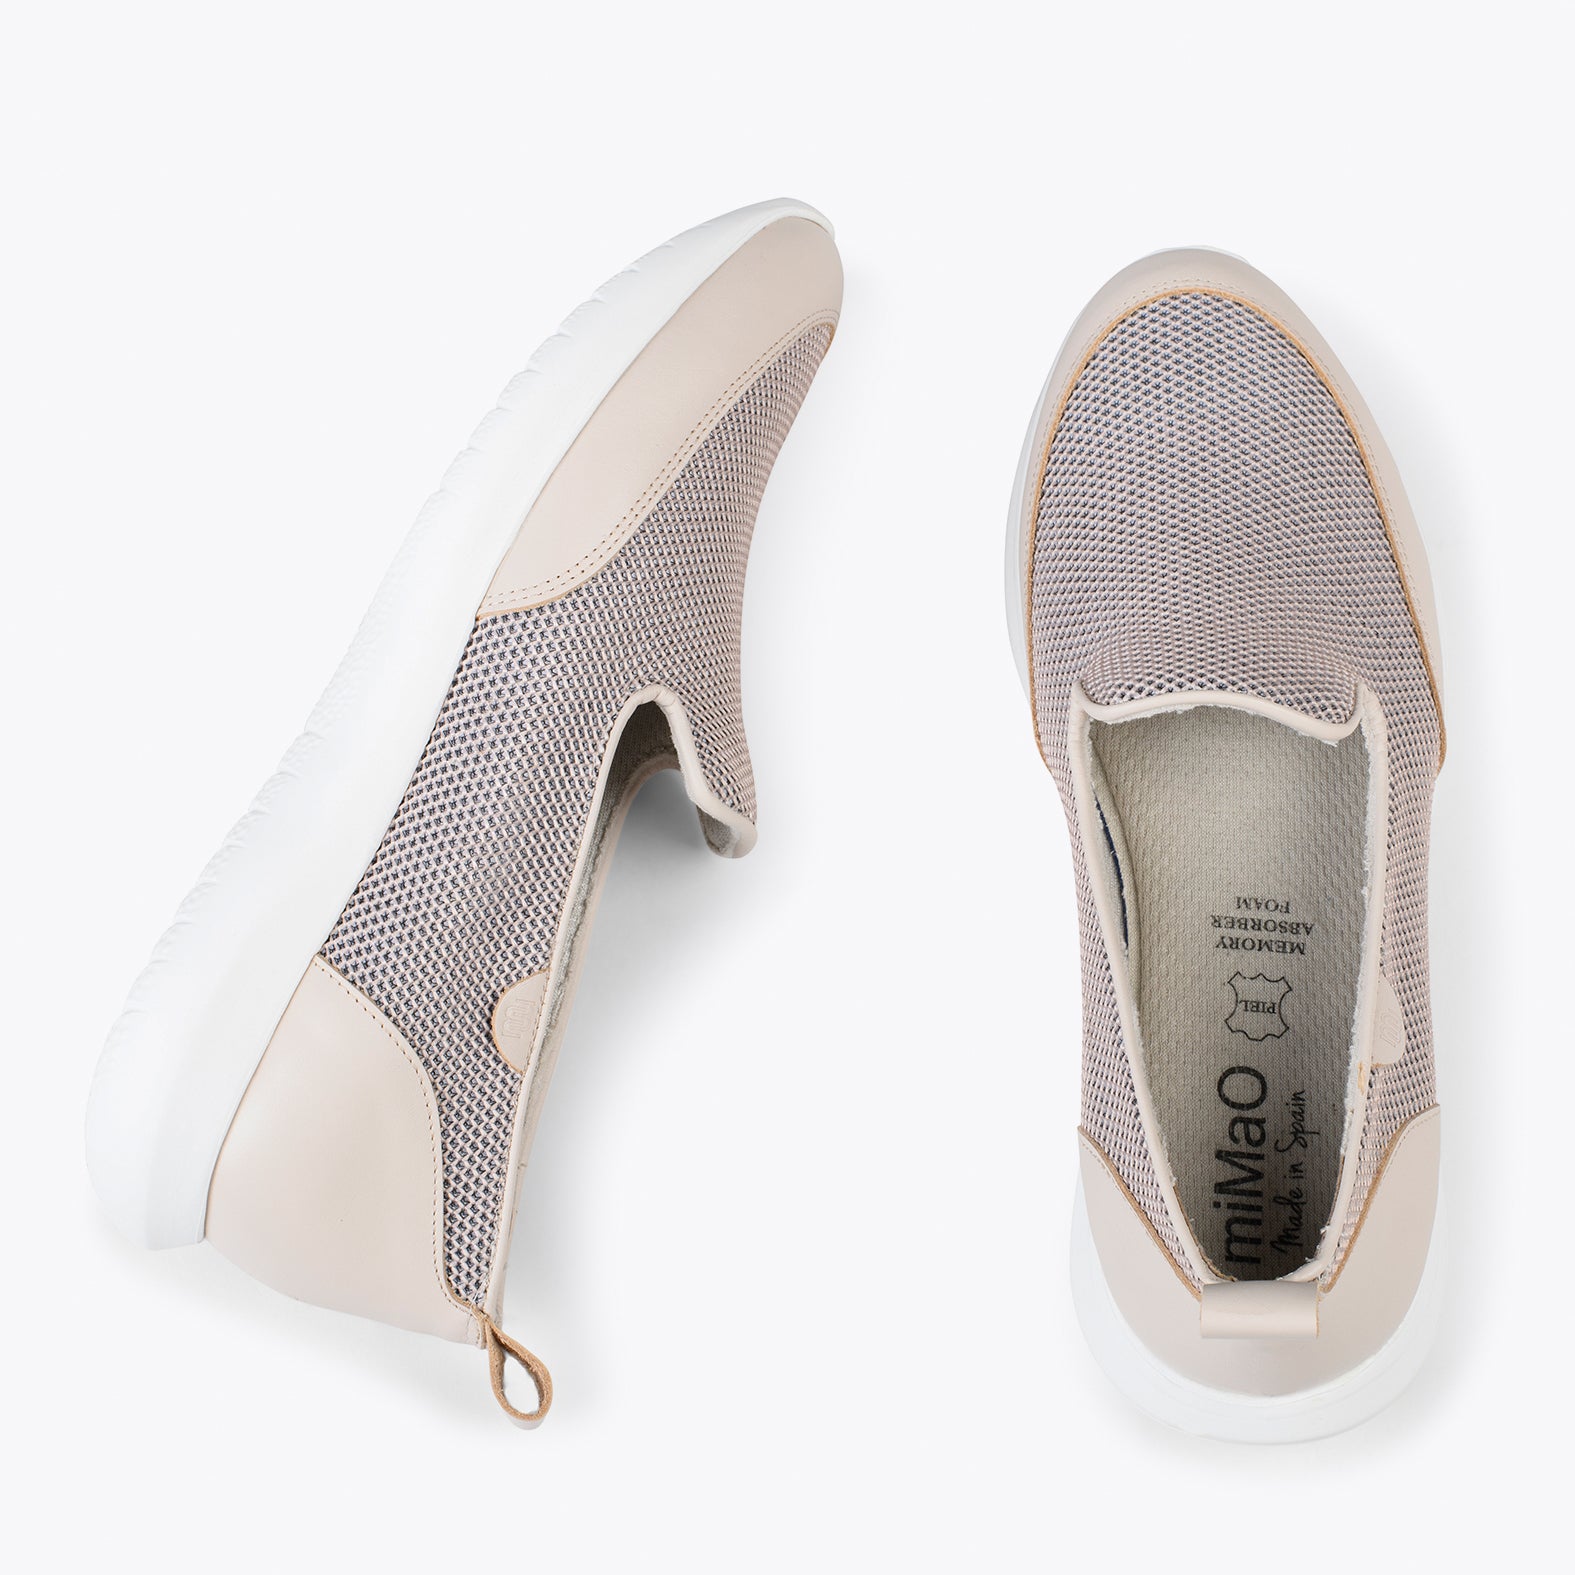 SLIPPER SPORT – BEIGE sneakers with no laces and mesh design